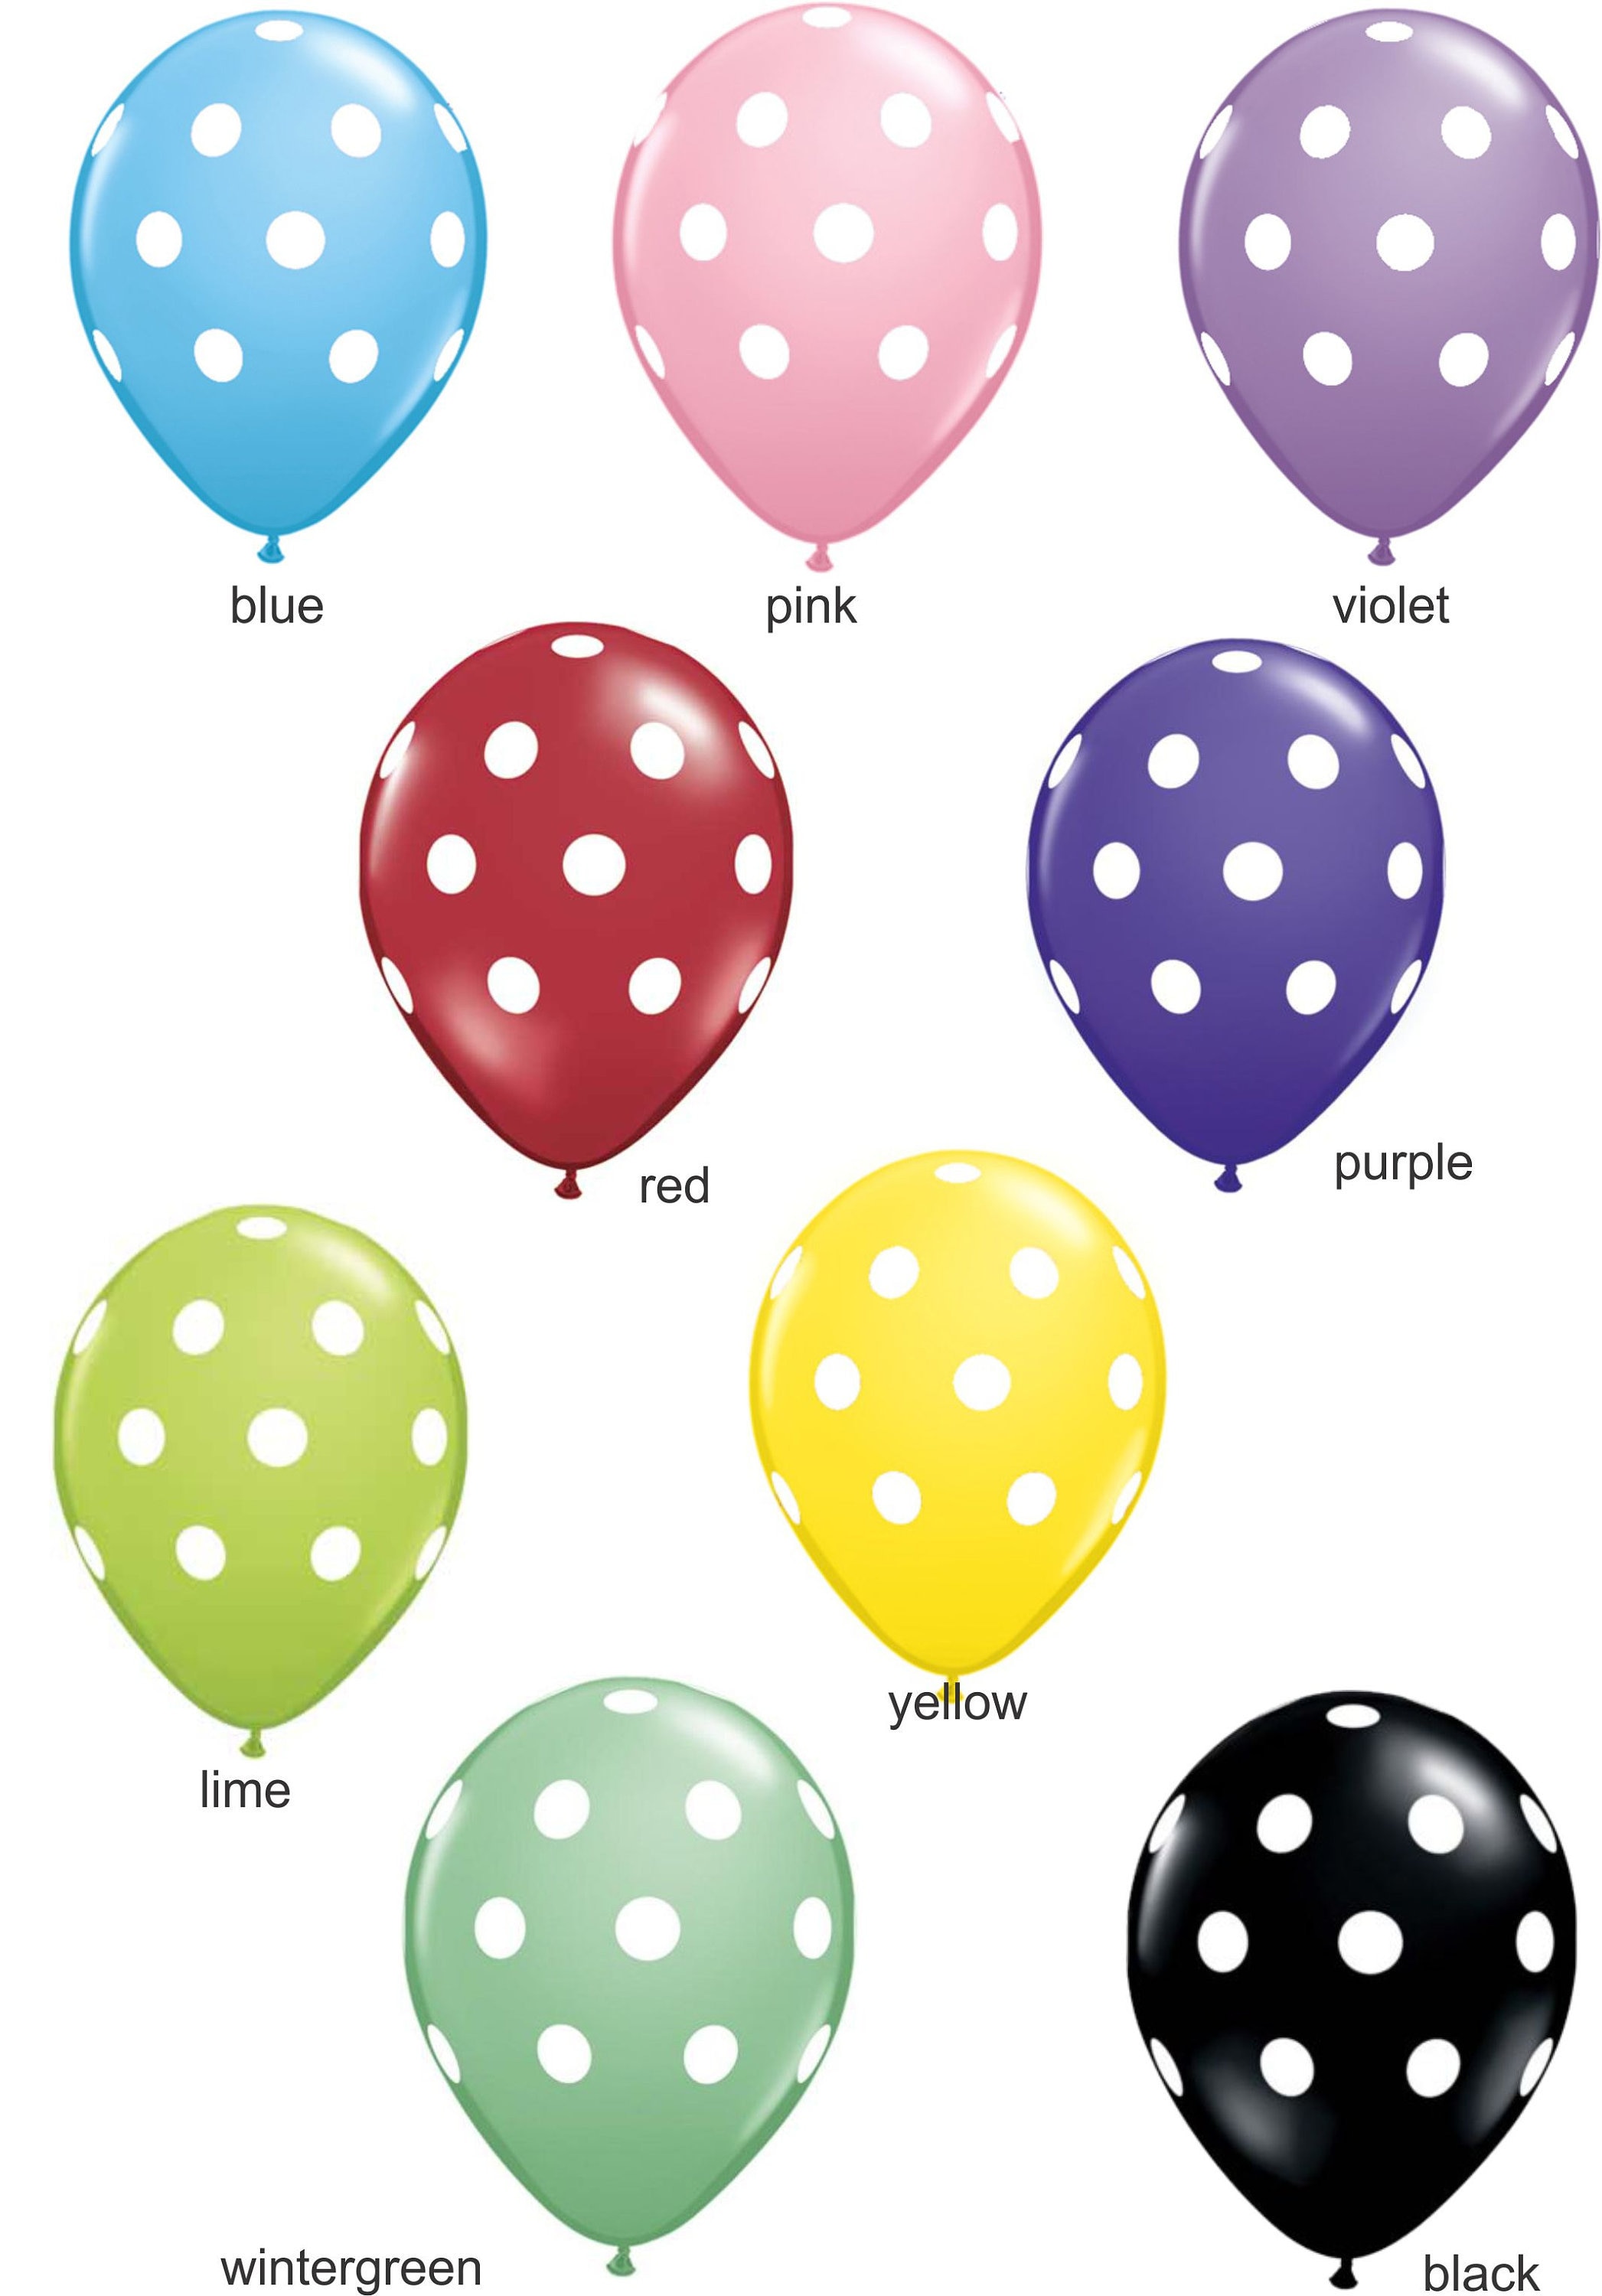 6ct, 12in, Transparent & Gold Dot Balloons